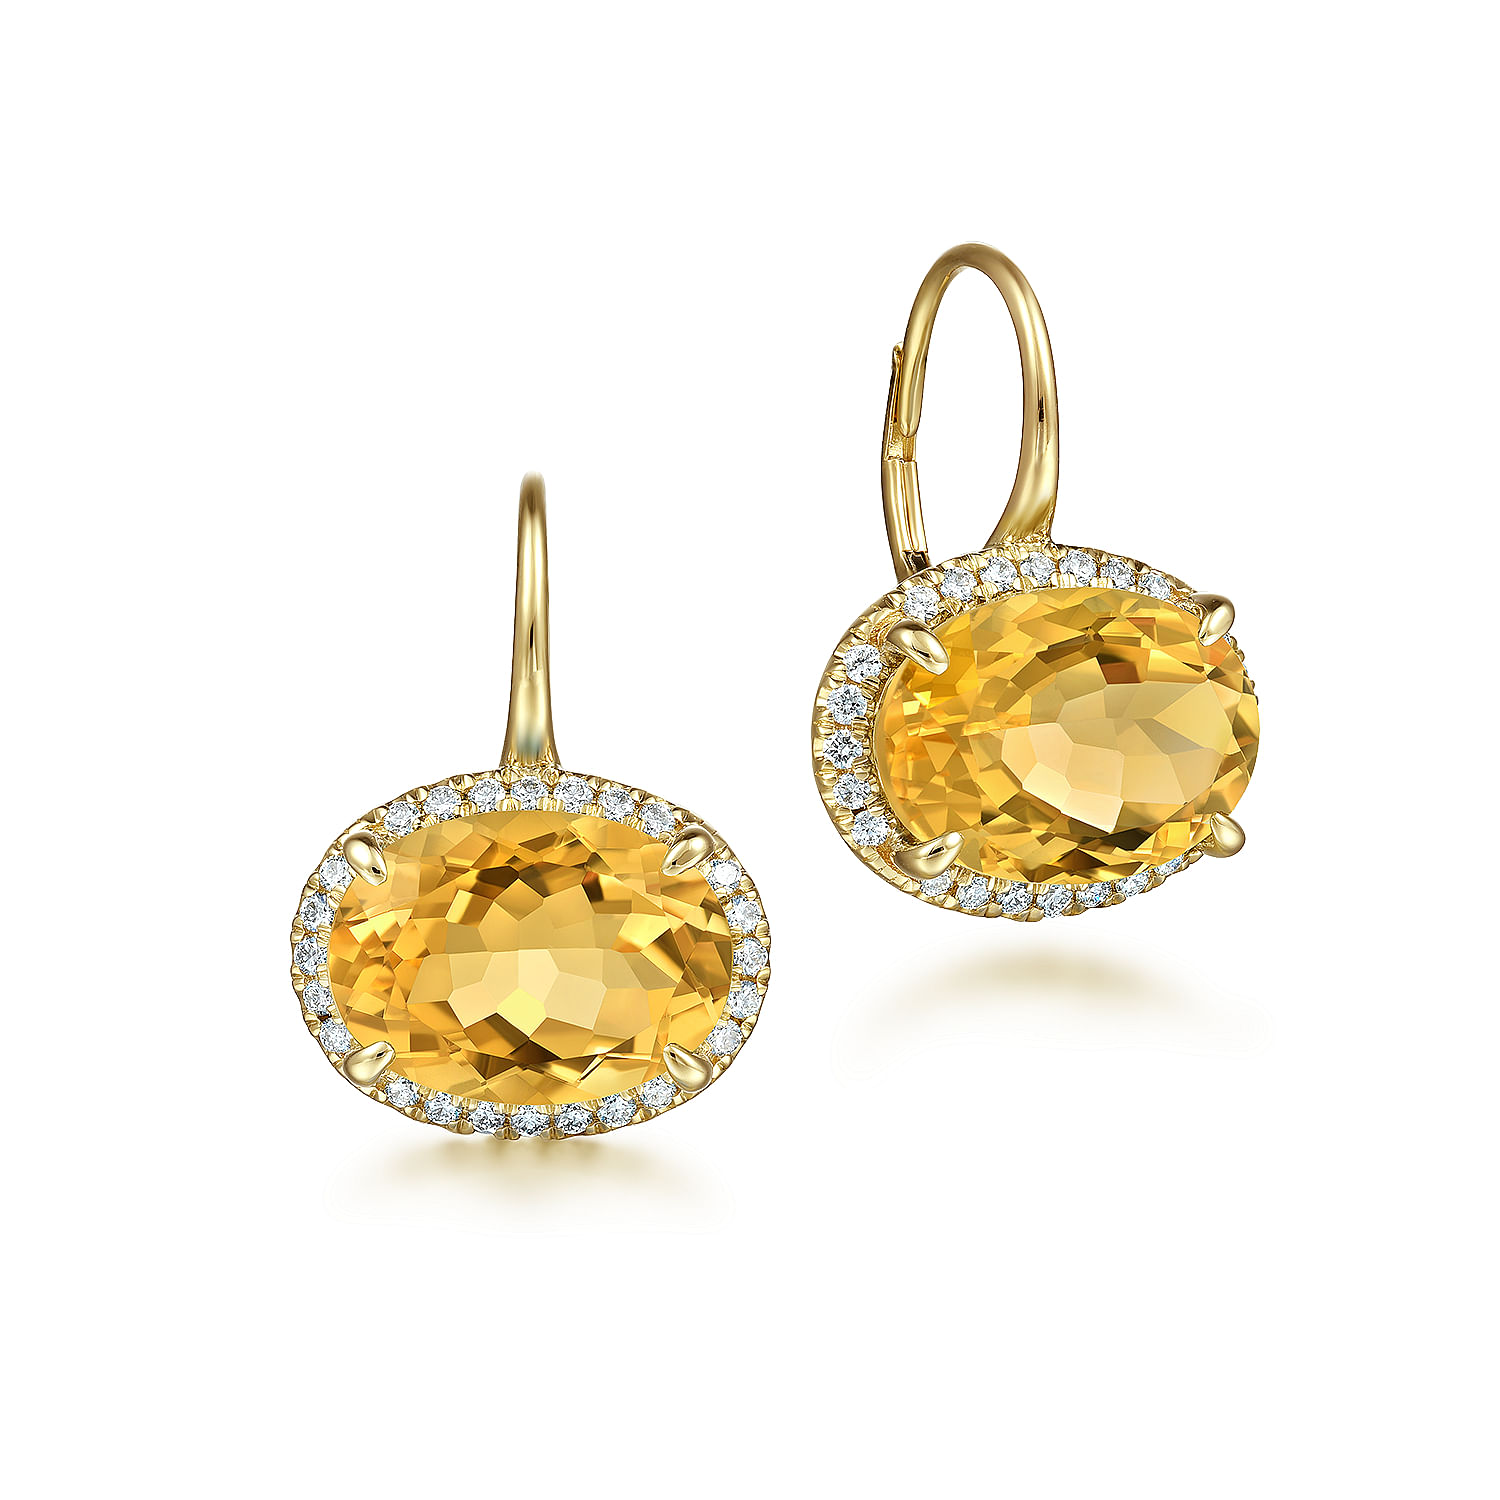 Gabriel - 14K Yellow Gold Diamond and Citrine Oval Shape Earrings With Flower Pattern J-Back